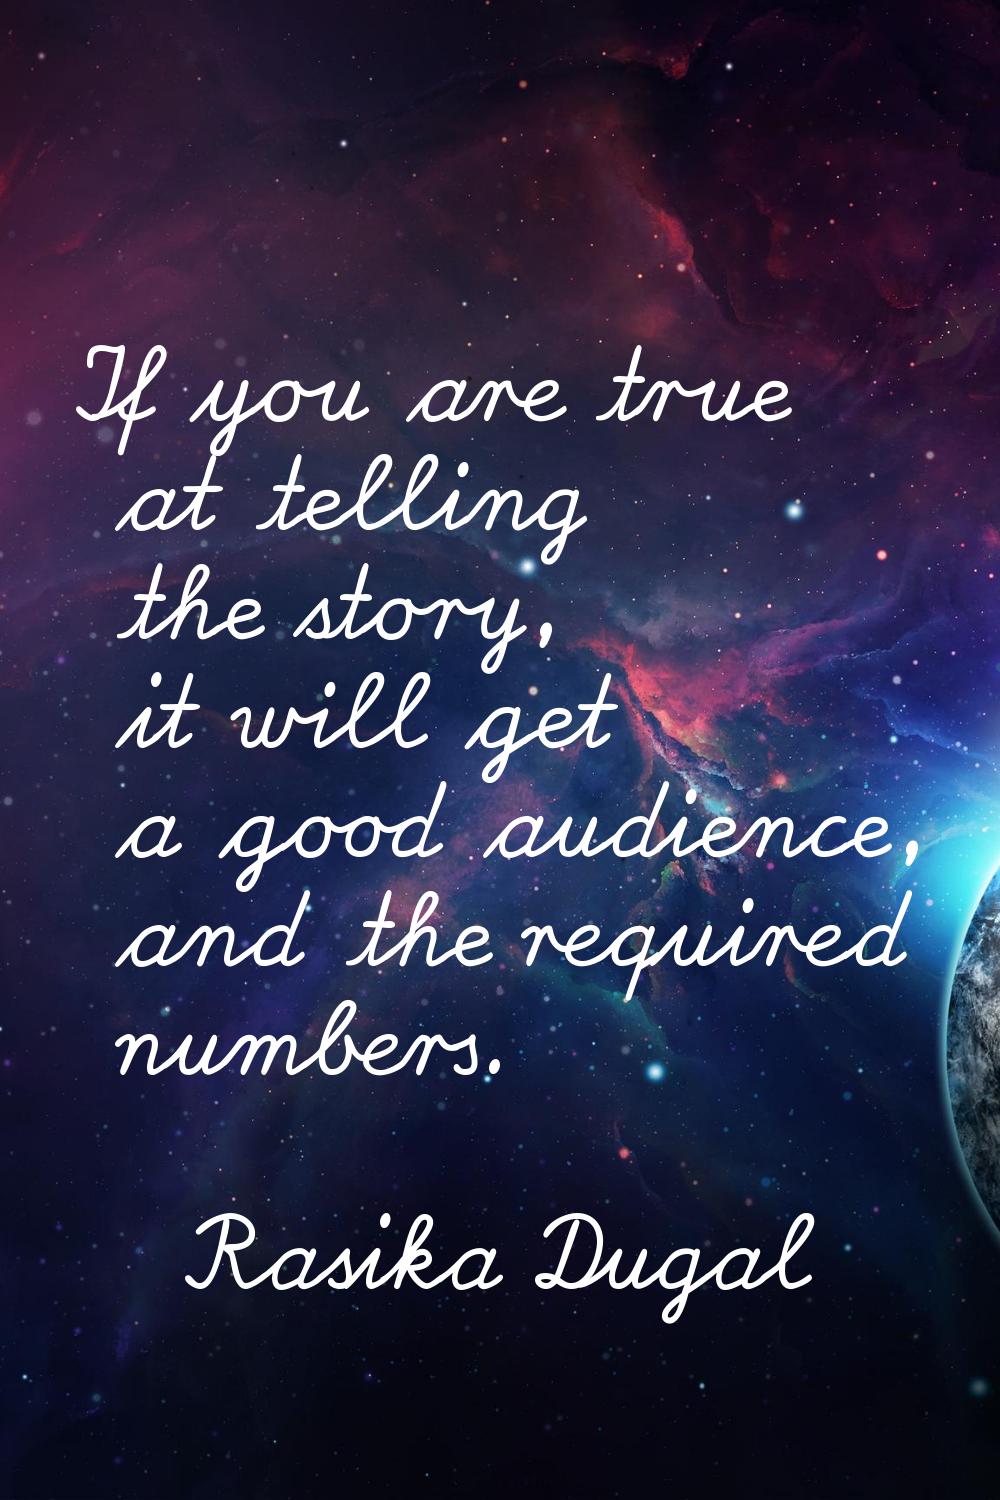 If you are true at telling the story, it will get a good audience, and the required numbers.